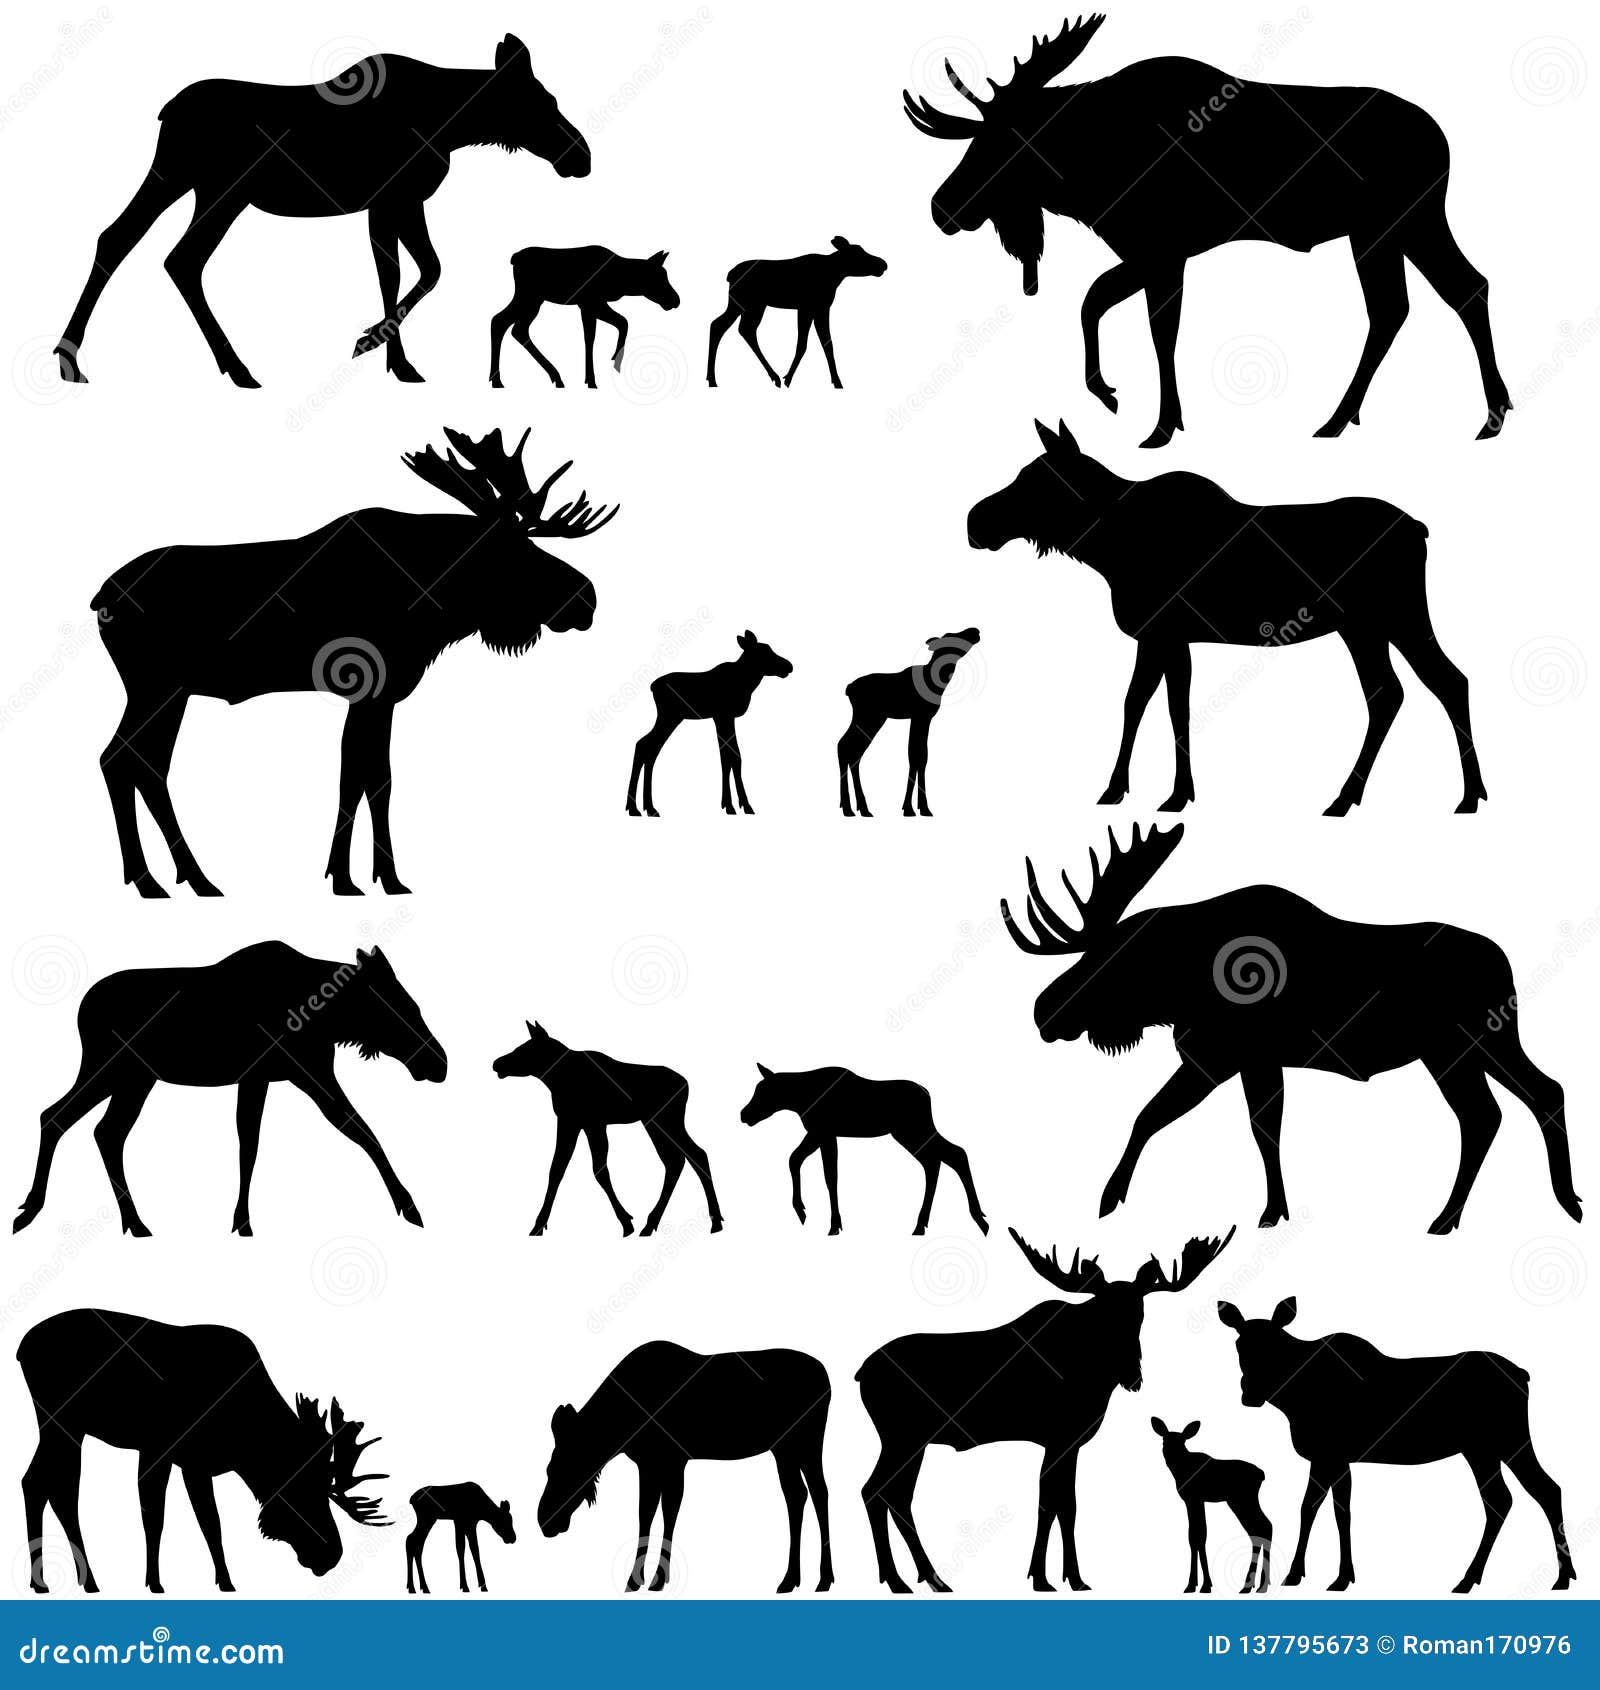 collection of silhouettes of mooses also named elks and its cubs